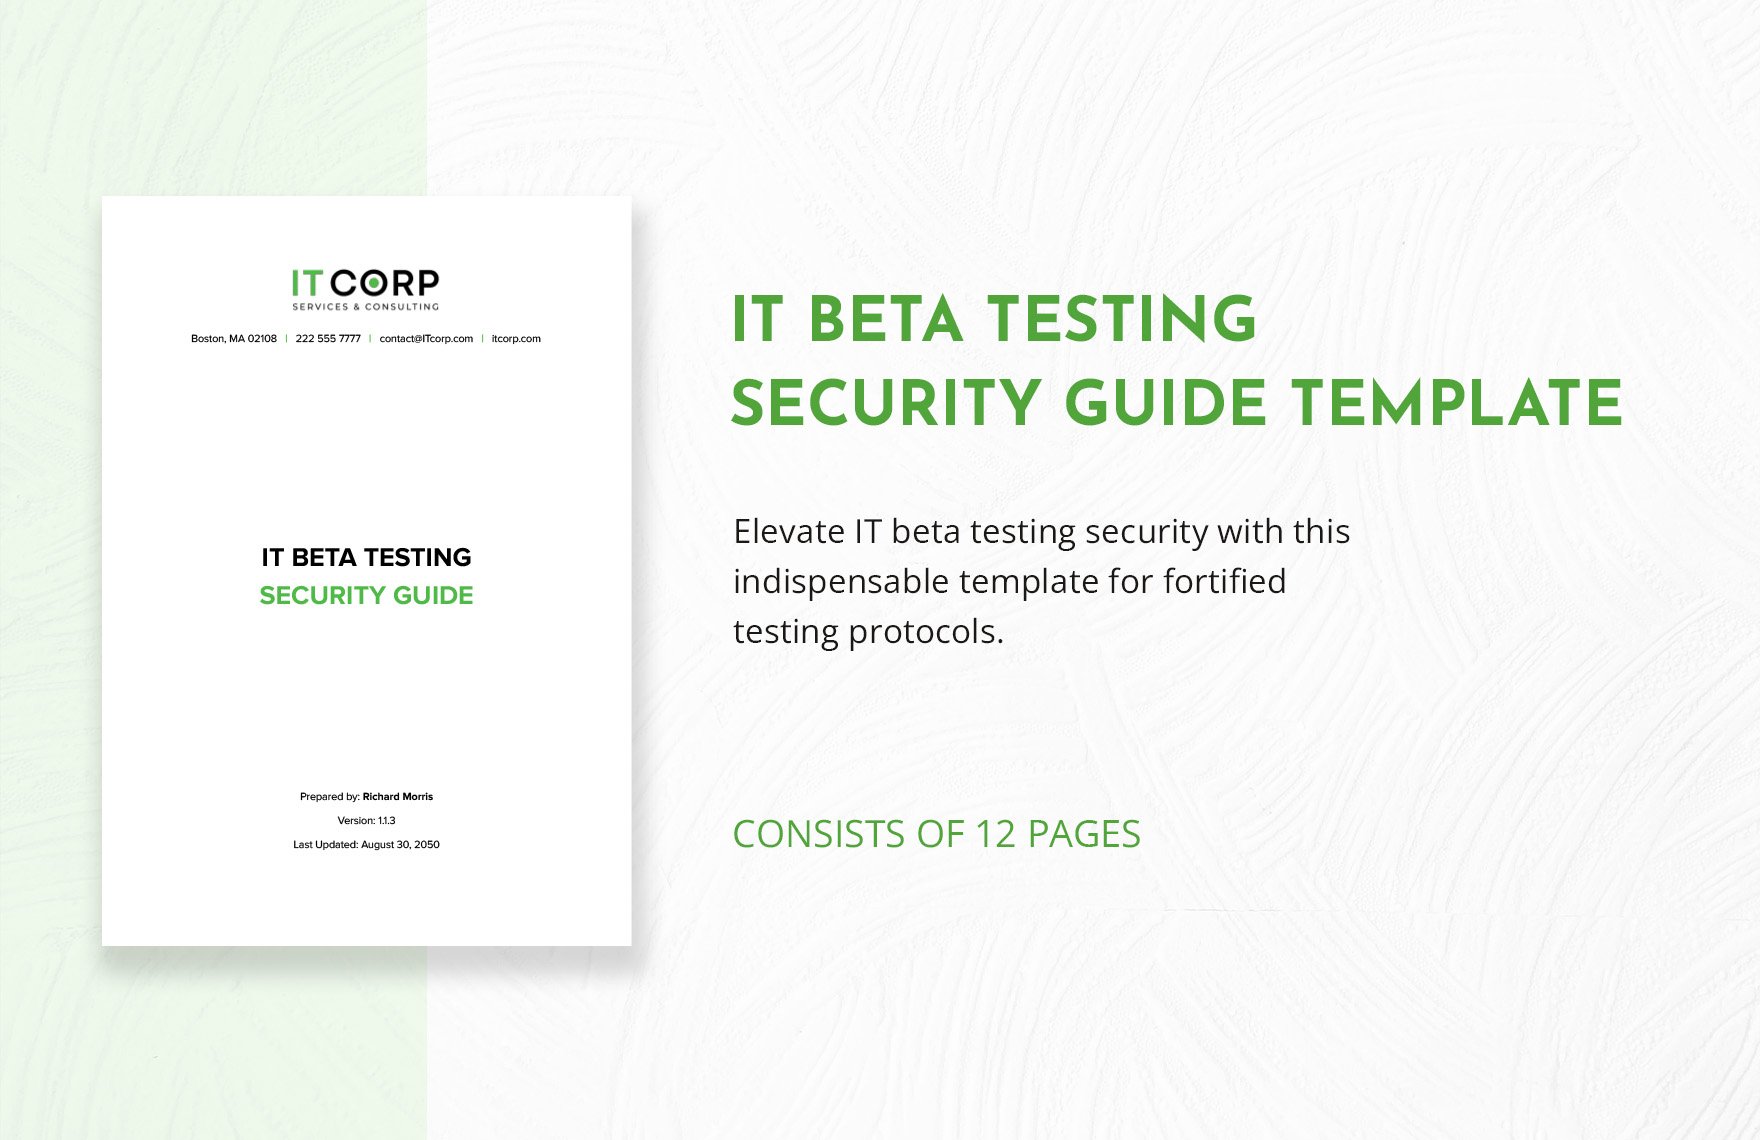 IT Beta Testing Security Guide Template in Word, Google Docs, PDF